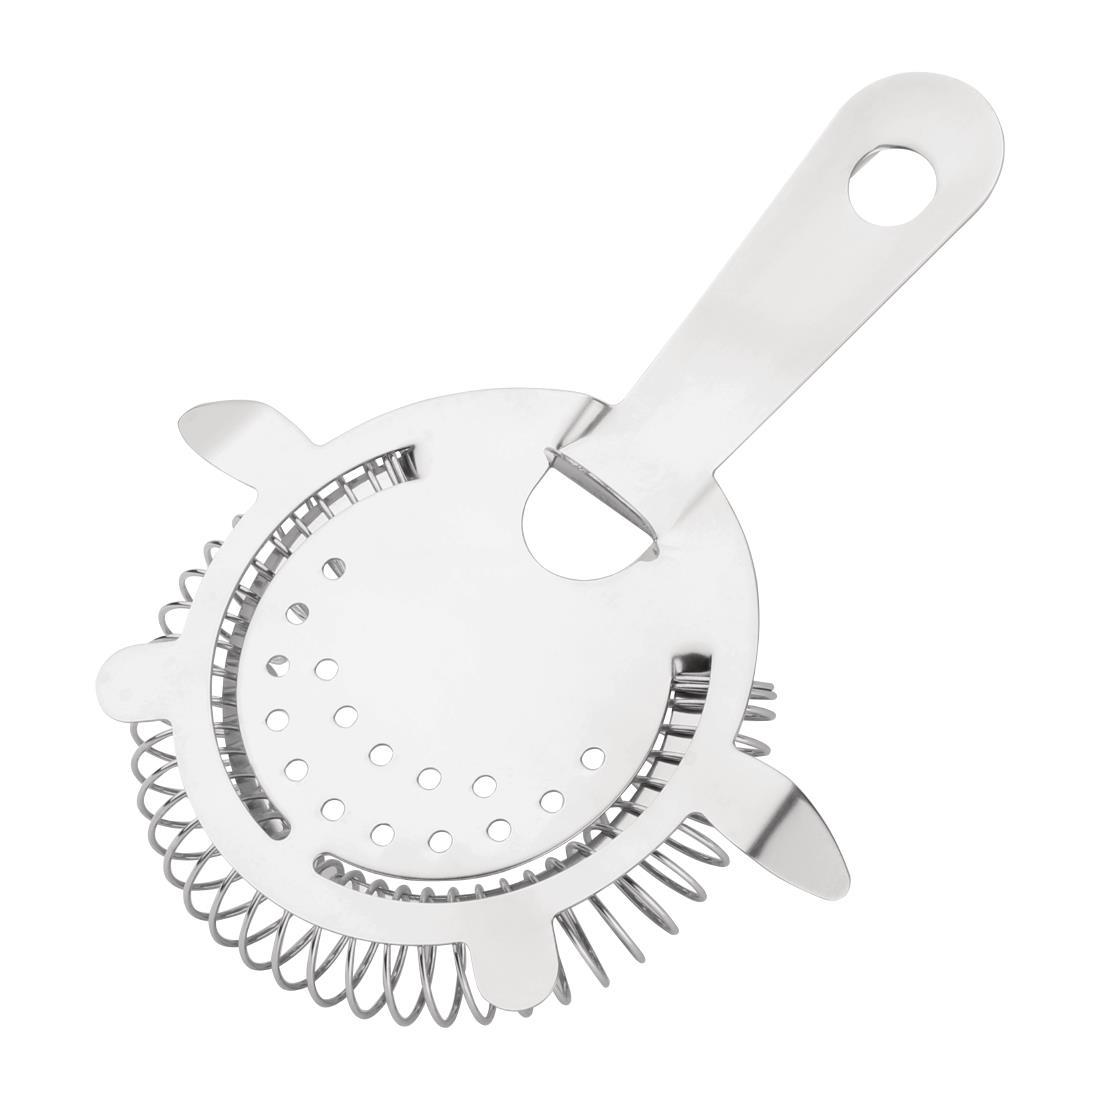 Olympia Hawthorne Strainer 4 Prong - DR590  - 2